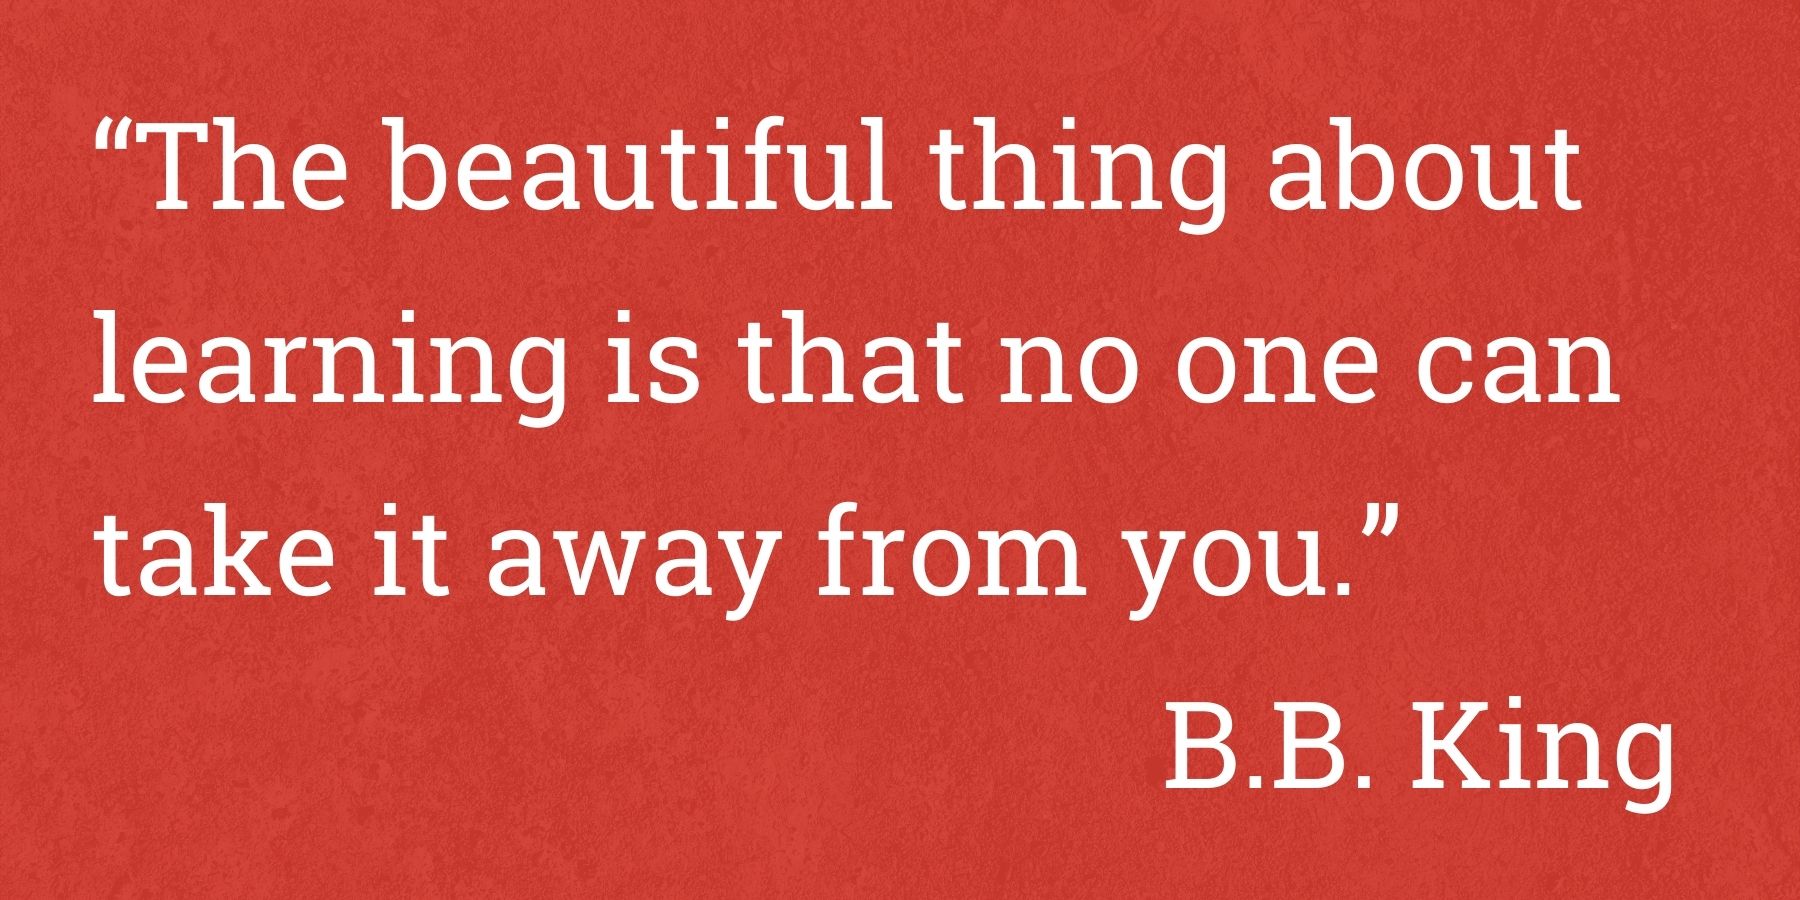 Quote by BB King